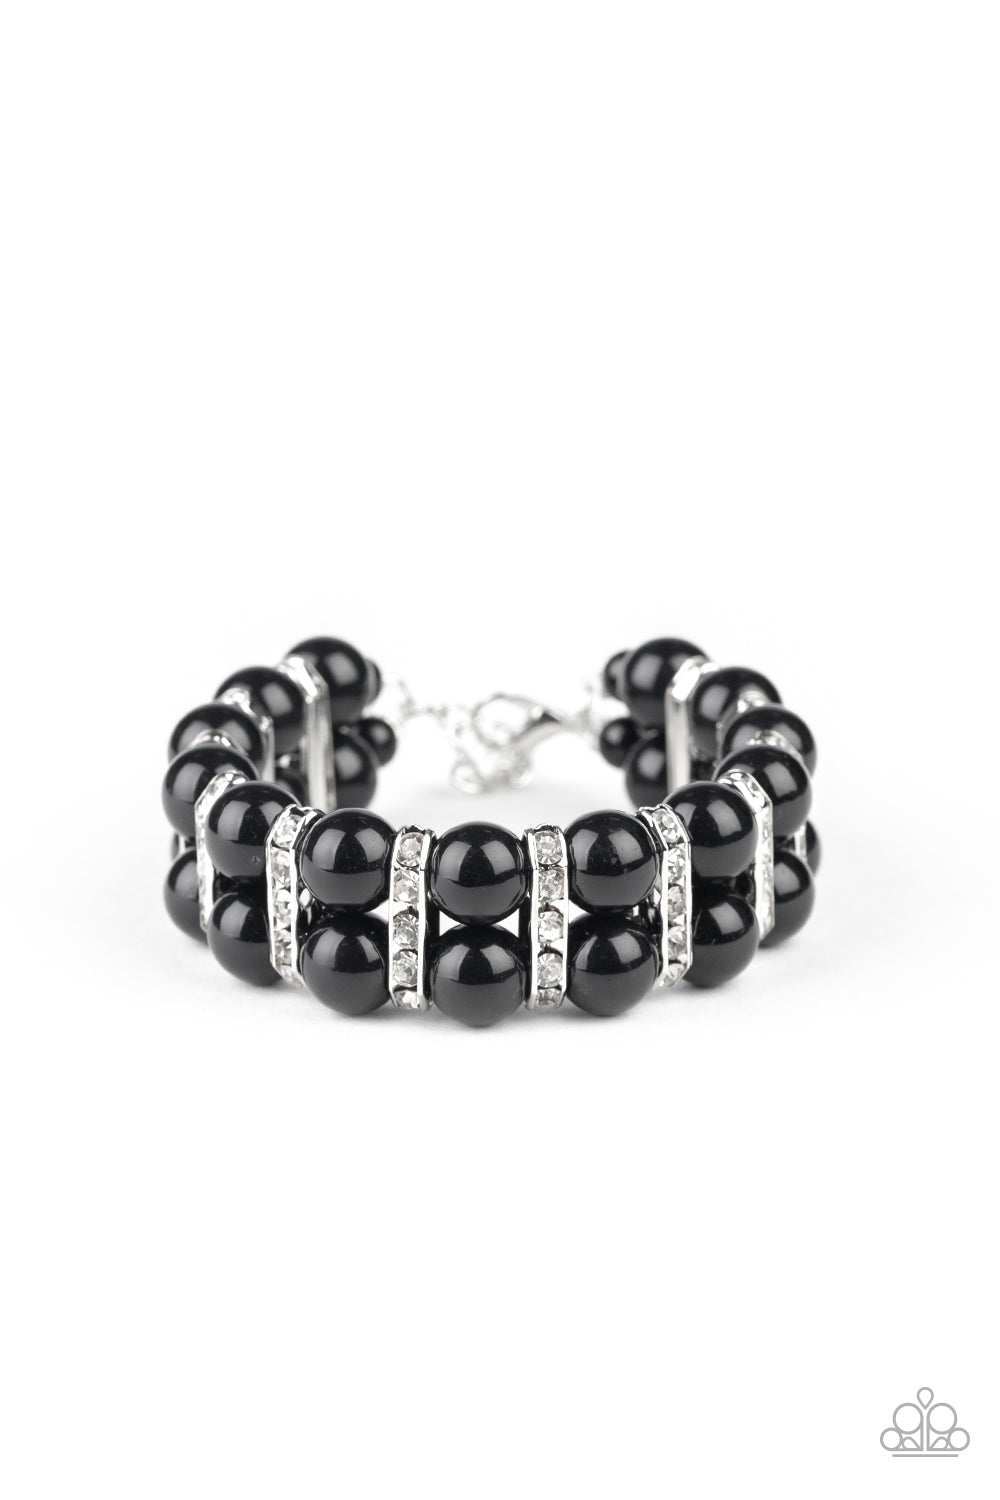 Glowing Glam - Black and Silver Bracelet - Paparazzi Accessories - Pairs of polished black beads and white rhinestone encrusted silver fittings are threaded along an invisible wire around the wrist for a refined flair. Features an adjustable clasp closure stylish fashion bracelet.